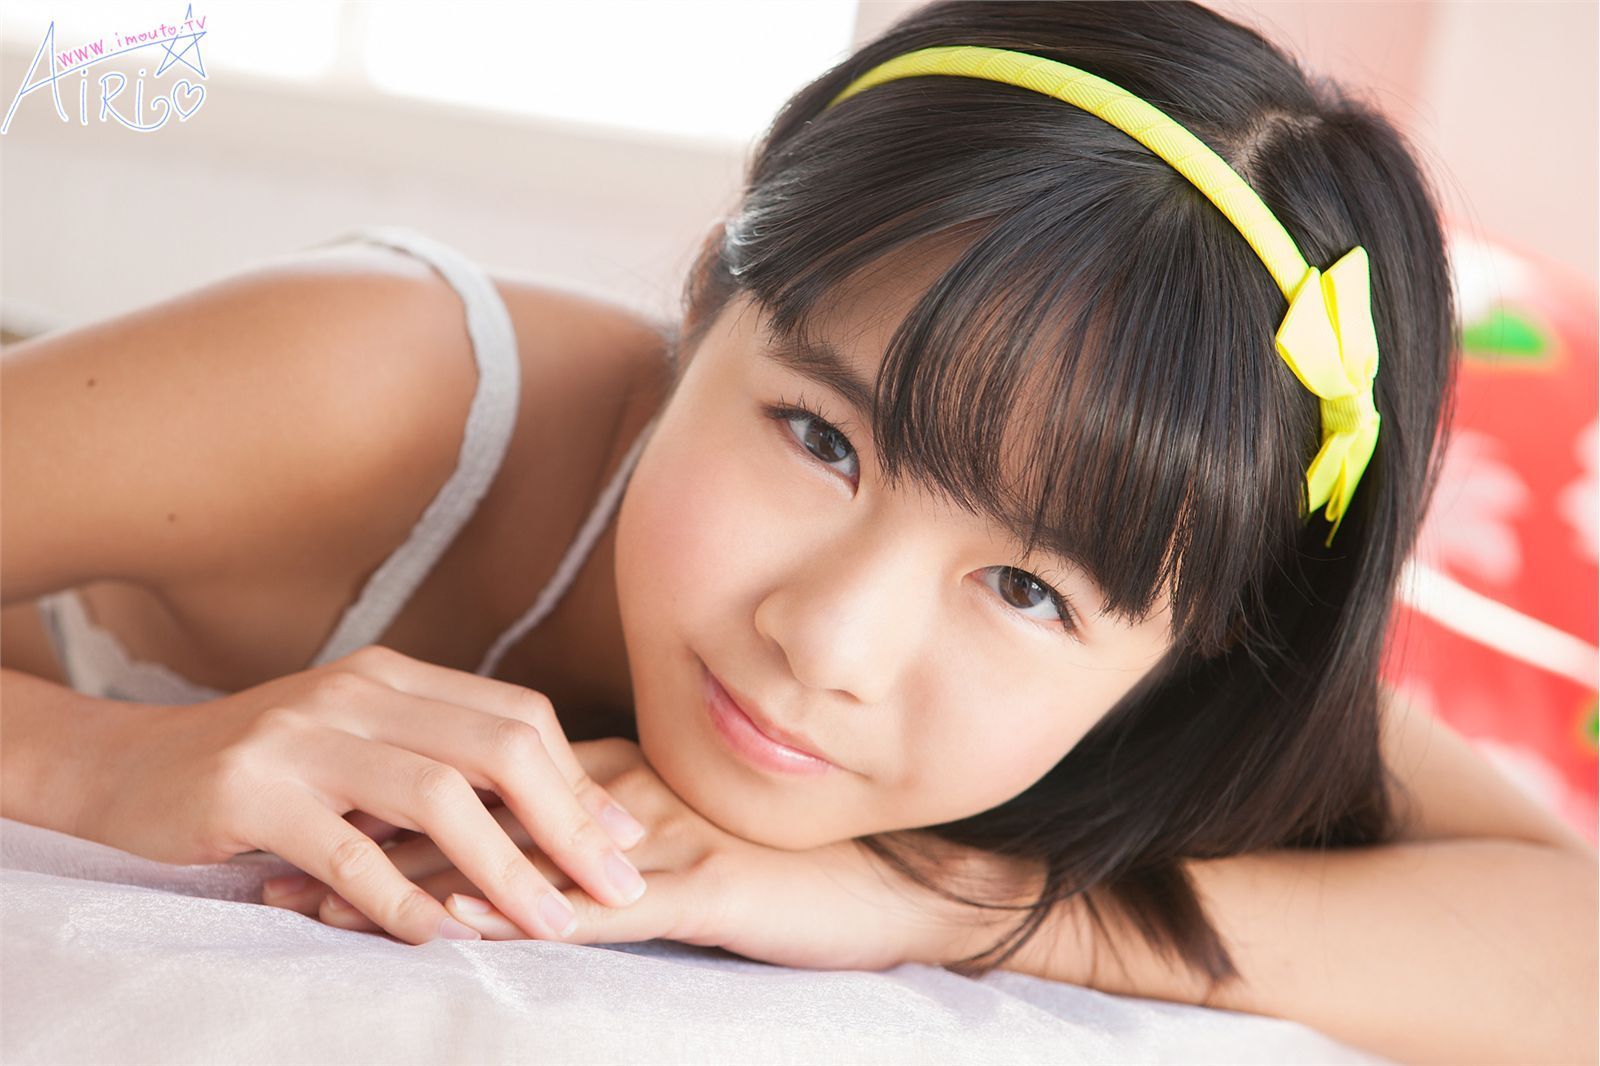 Imouto tv images